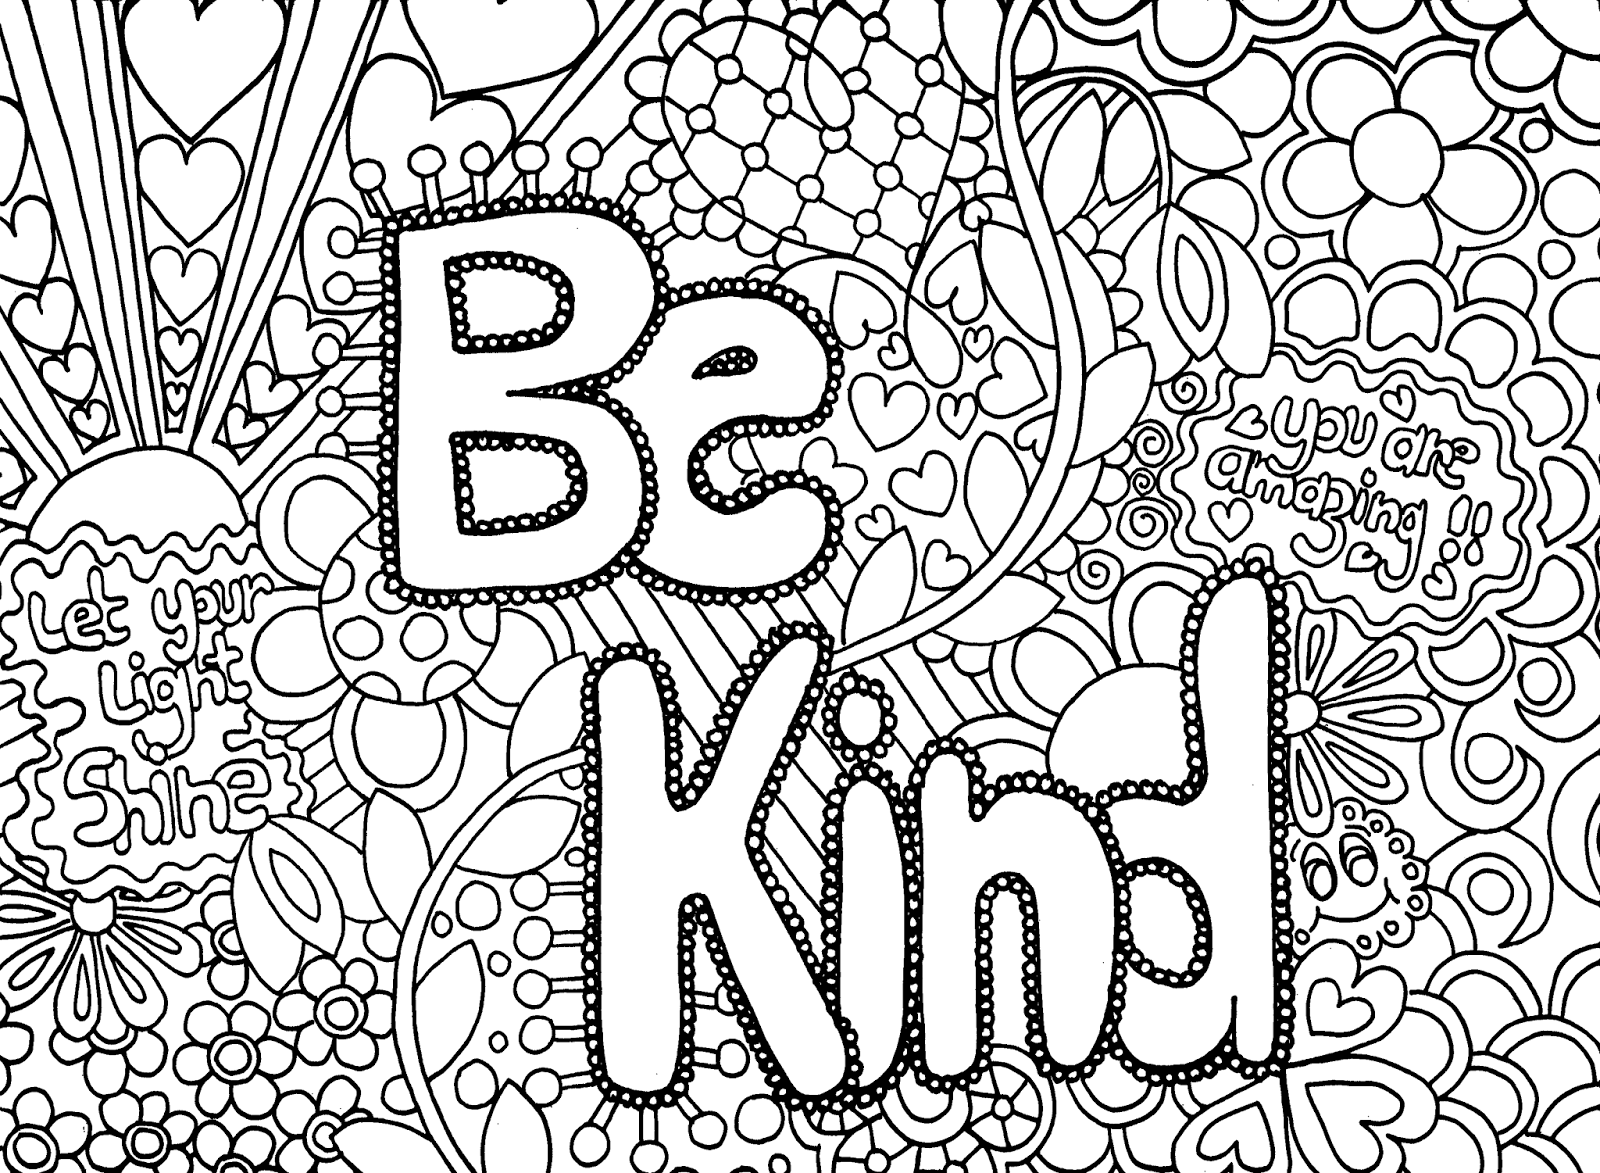 Really Hard - Coloring Pages for Kids and for Adults